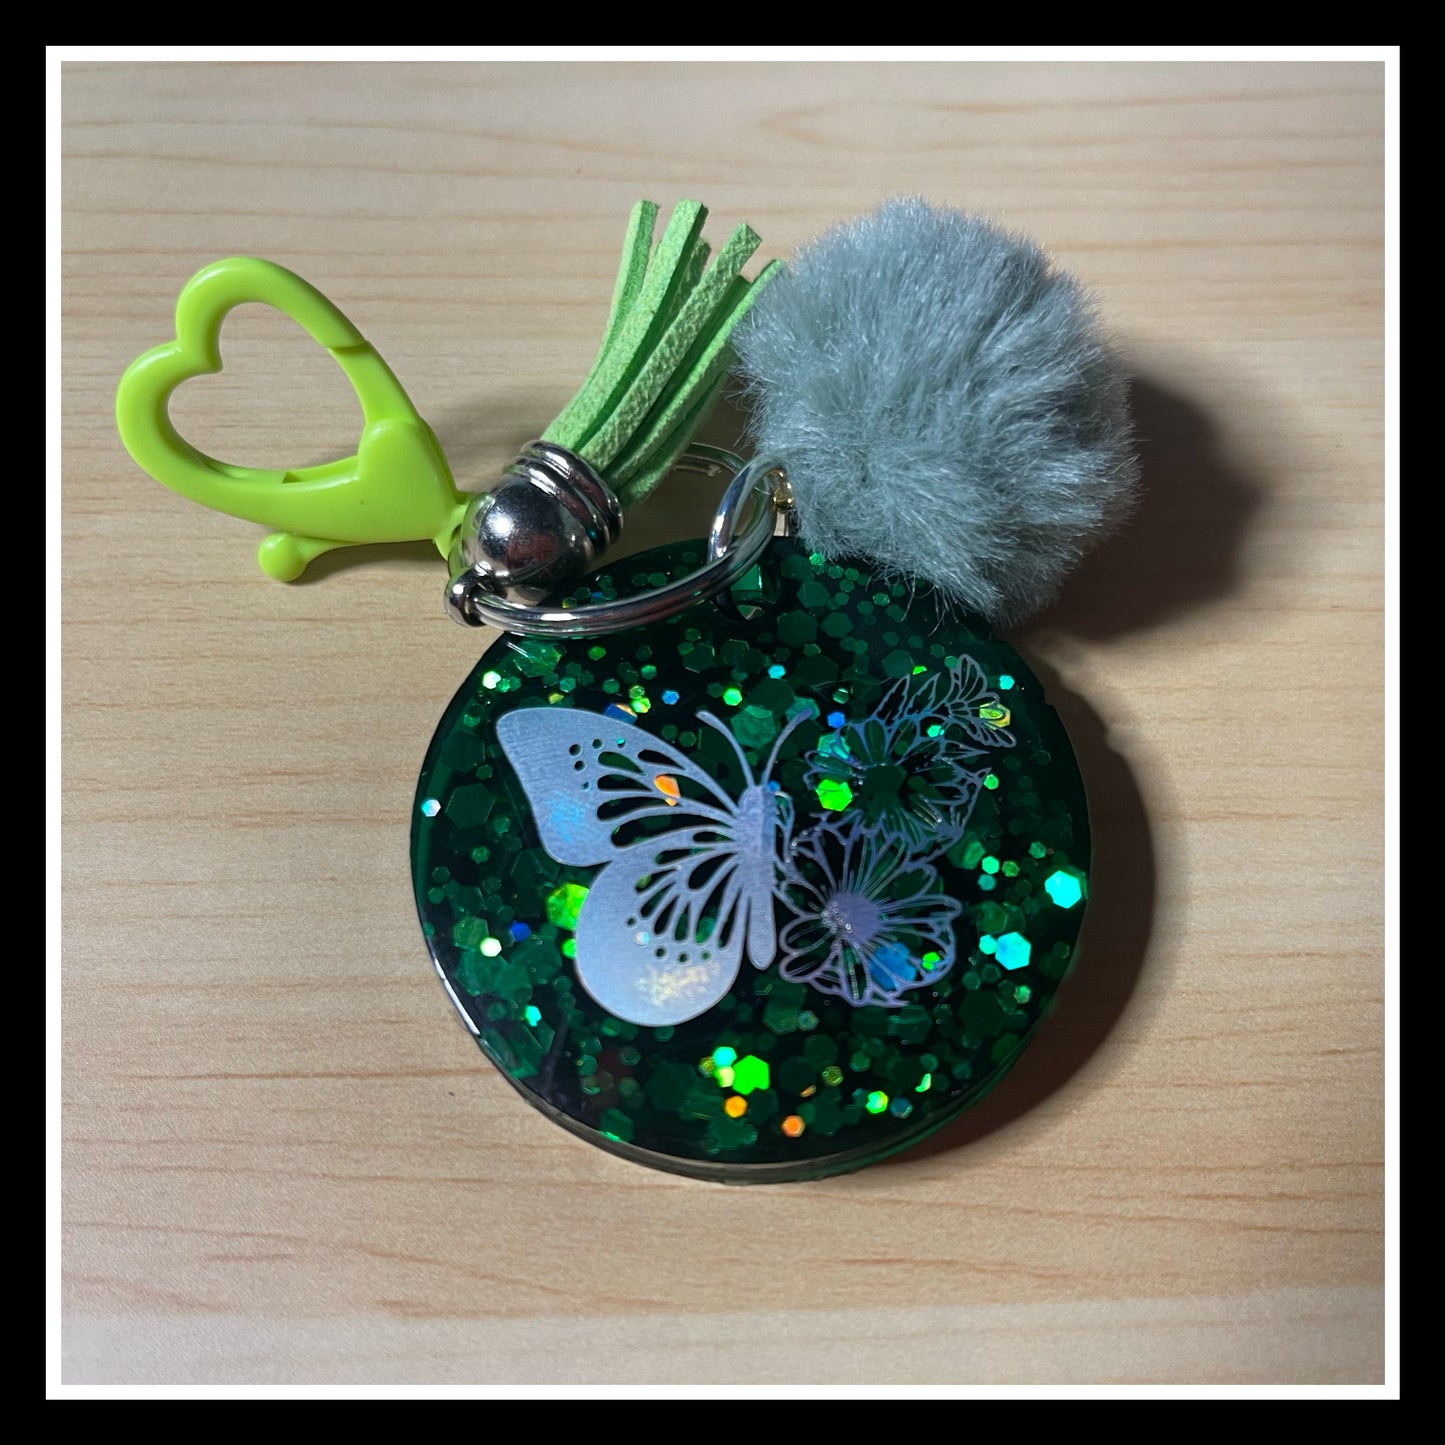 Circular Keychains W/ Iridescent Foil (Multiple Colors Available)